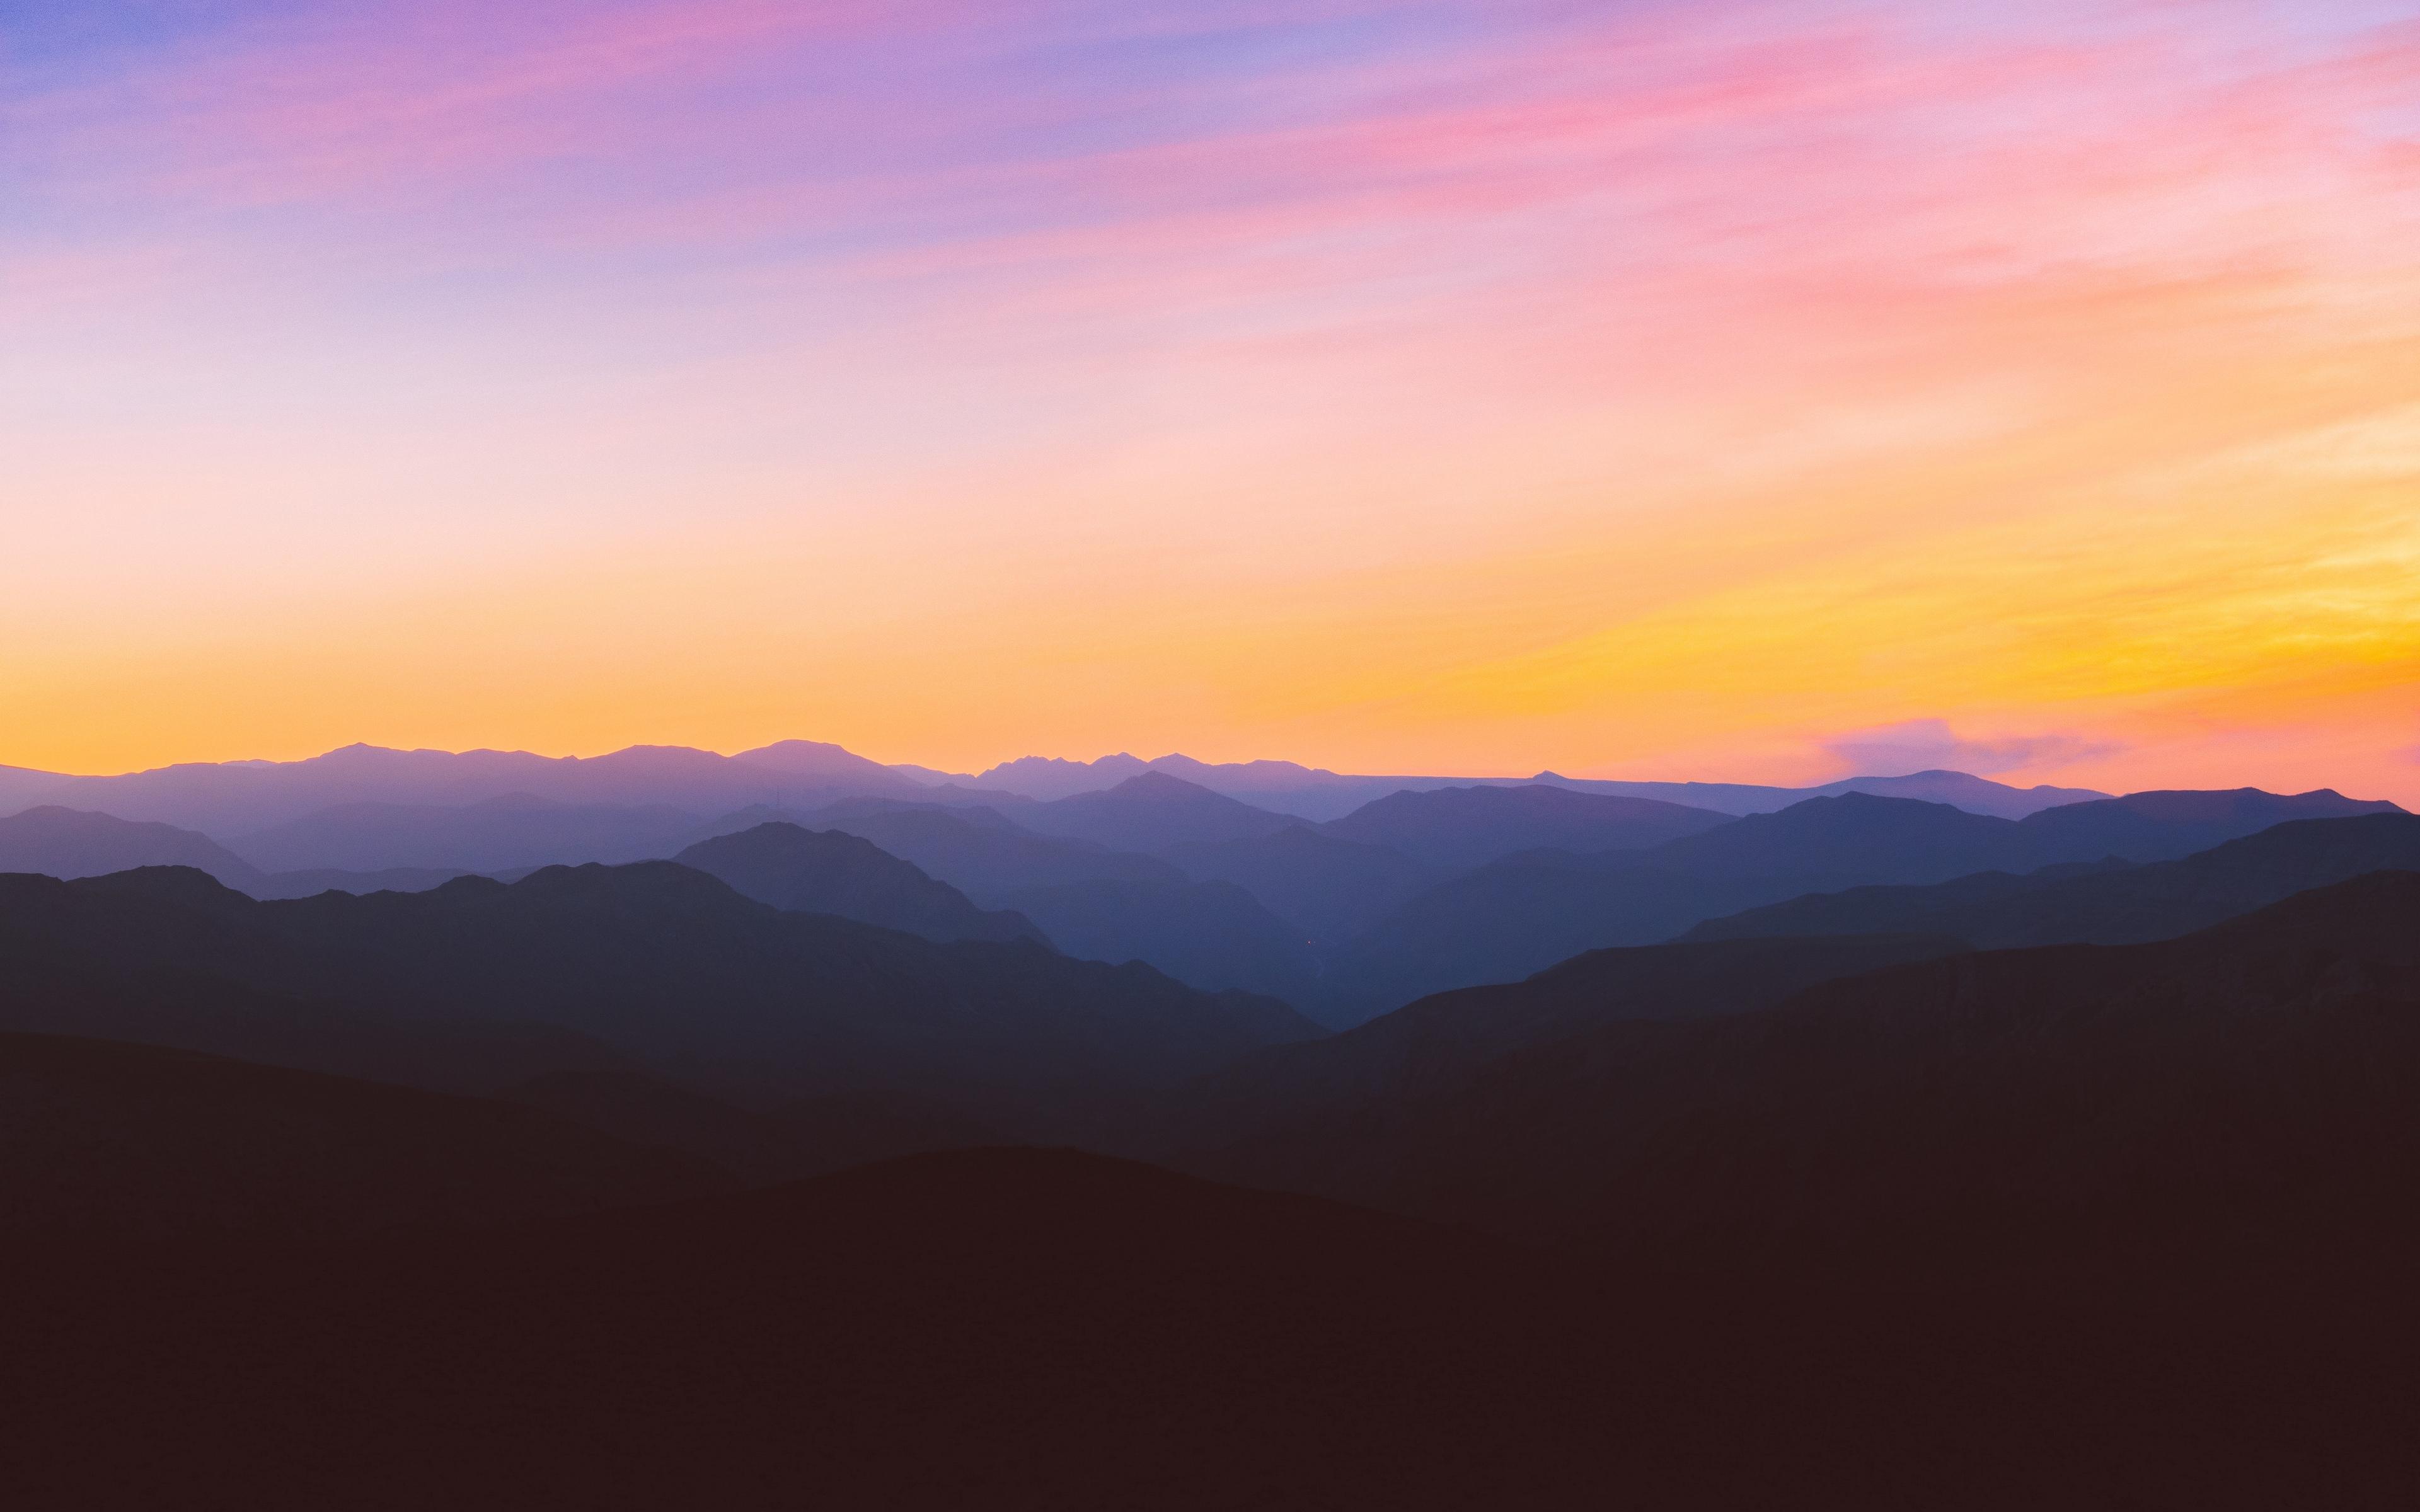 Download wallpaper 3840x2400 mountains, silhouettes, sunset